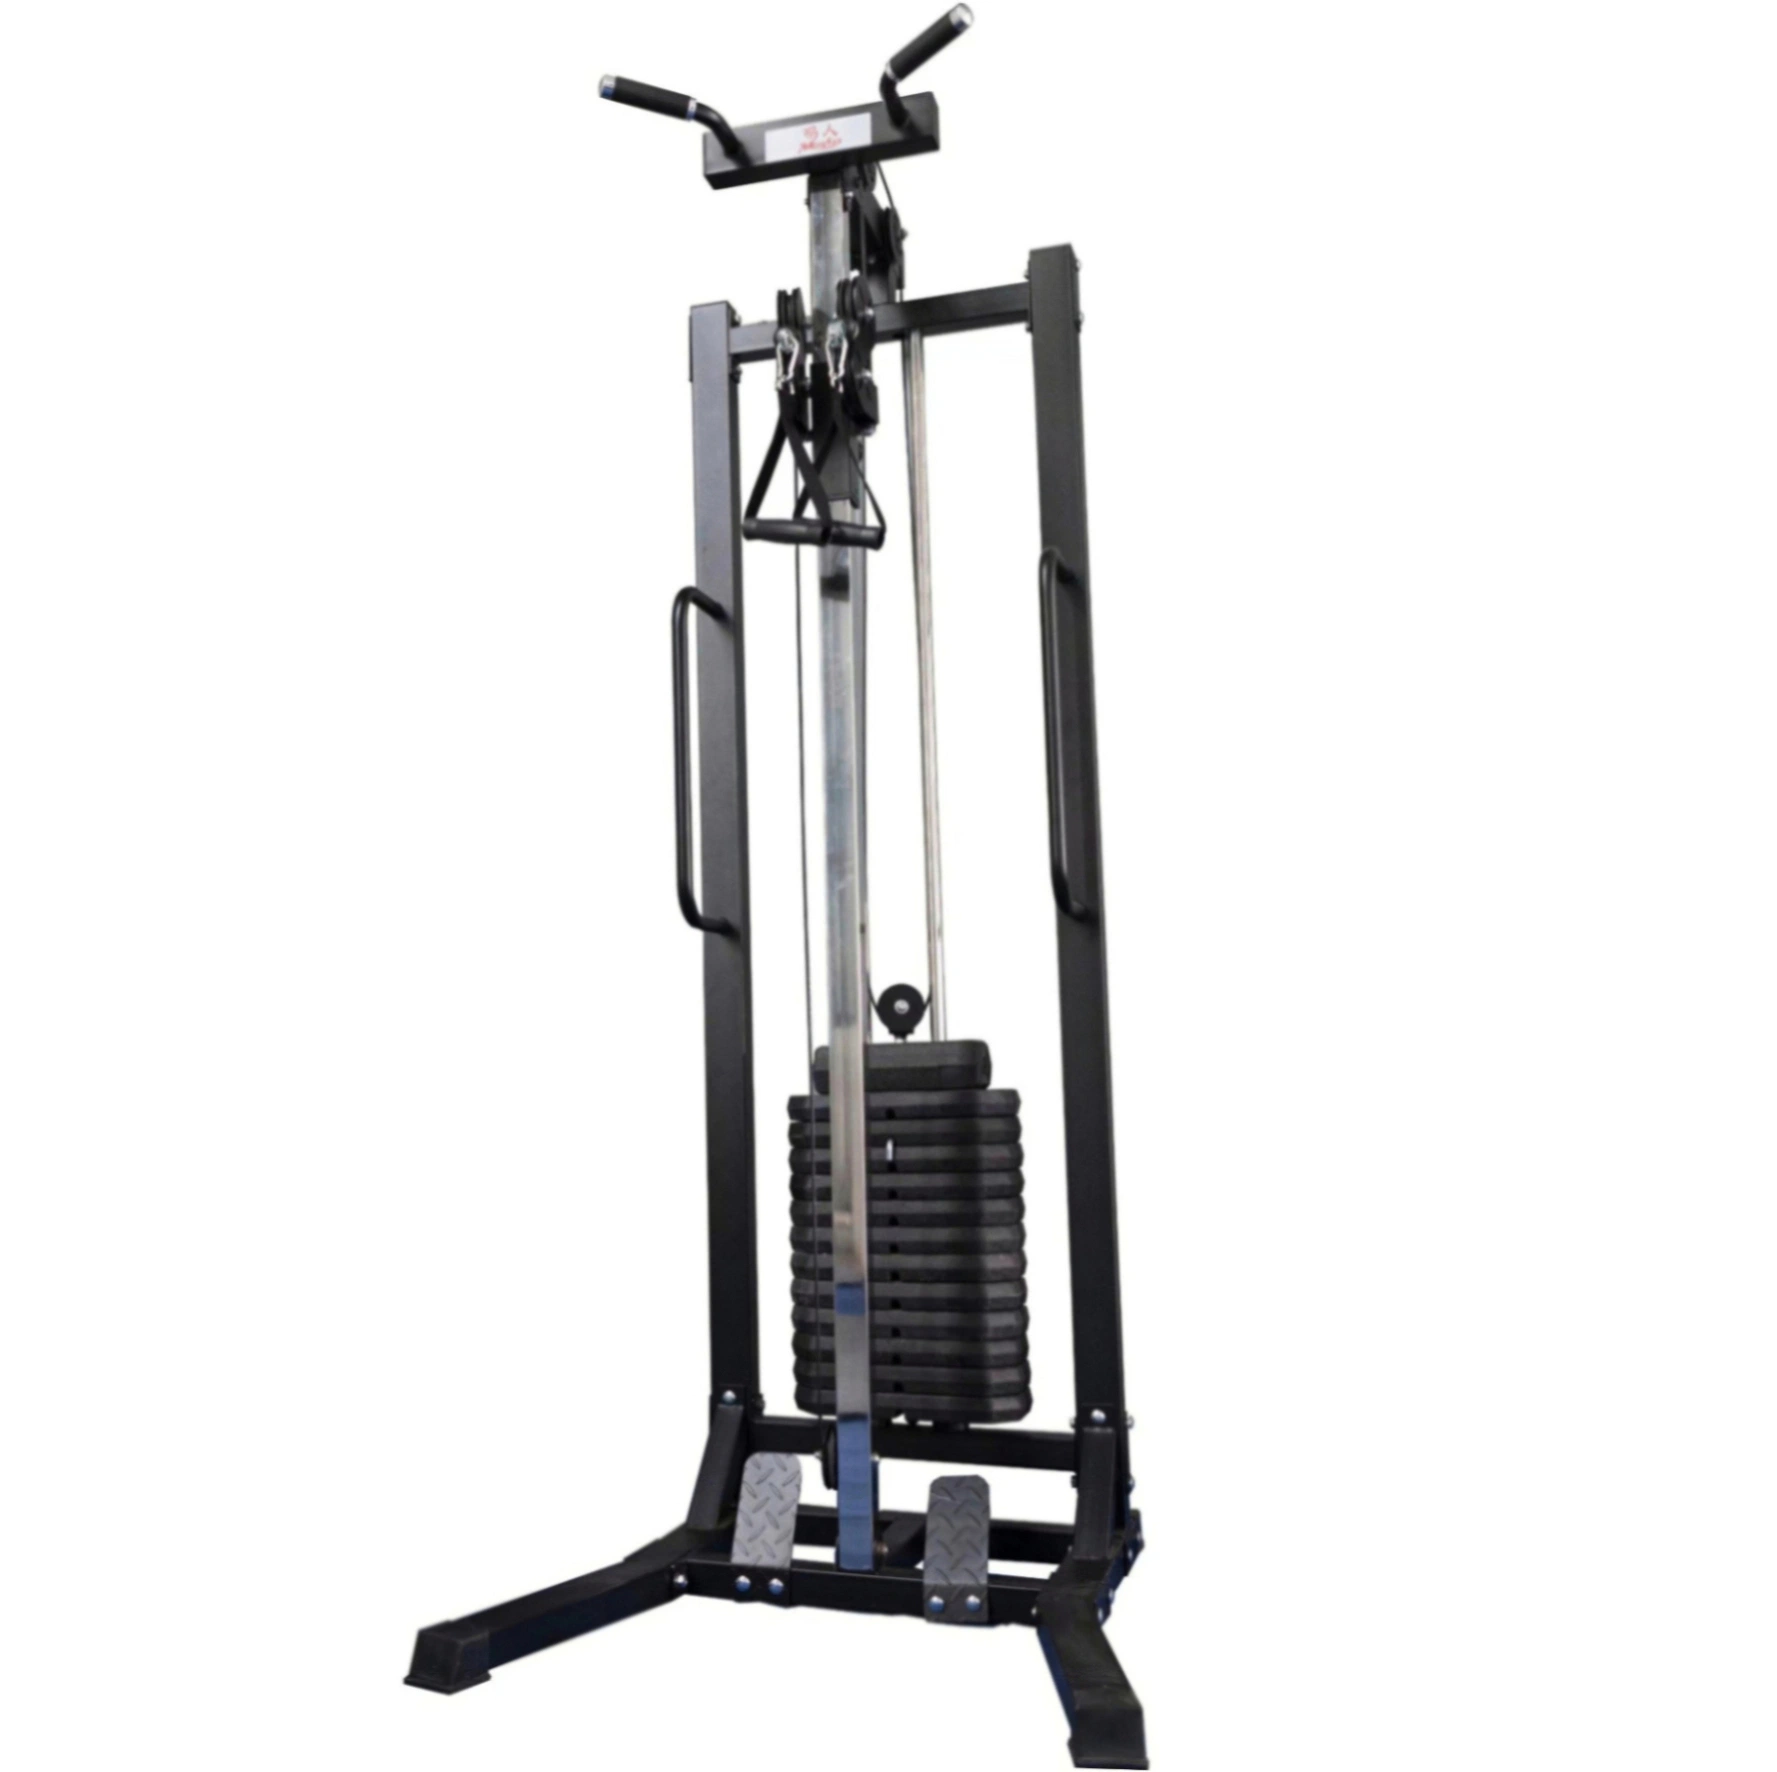 Mra5 New Arrival Sporting Goods Cable Machine for Sale